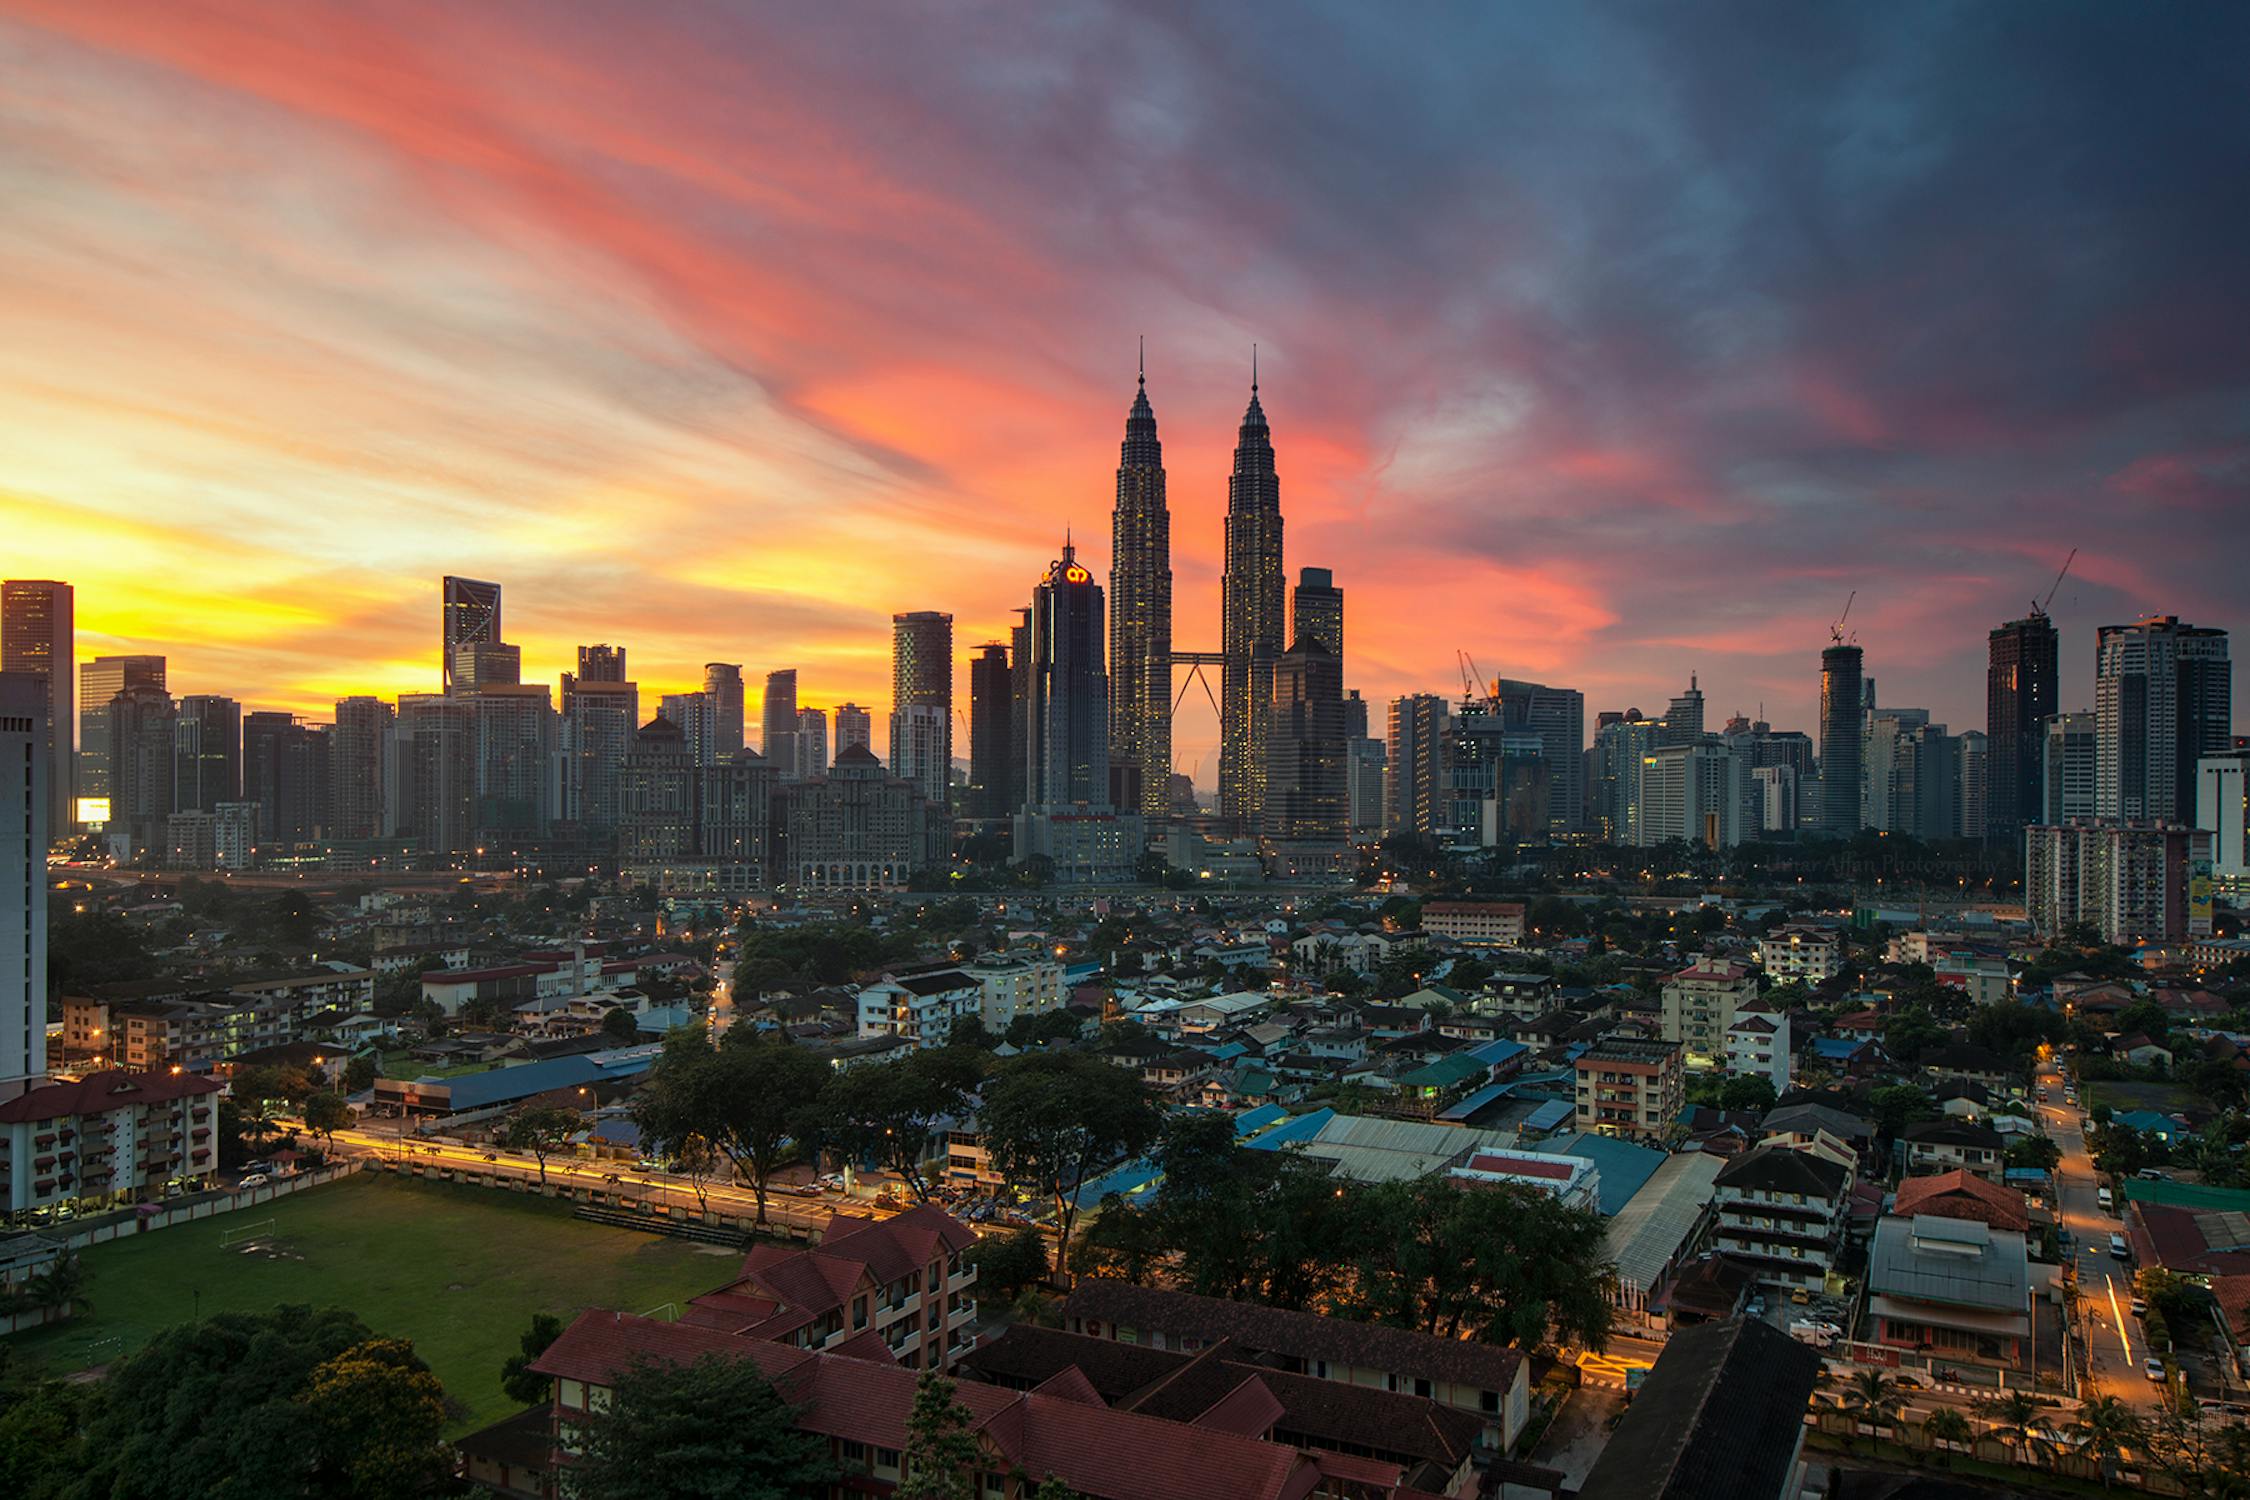 Stunning view of Malaysia's iconic Petronas Towers lit up at dusk, symbolizing the country's welcoming visa-free policy for Indian tourists and the exciting travel opportunities with Explorerg.